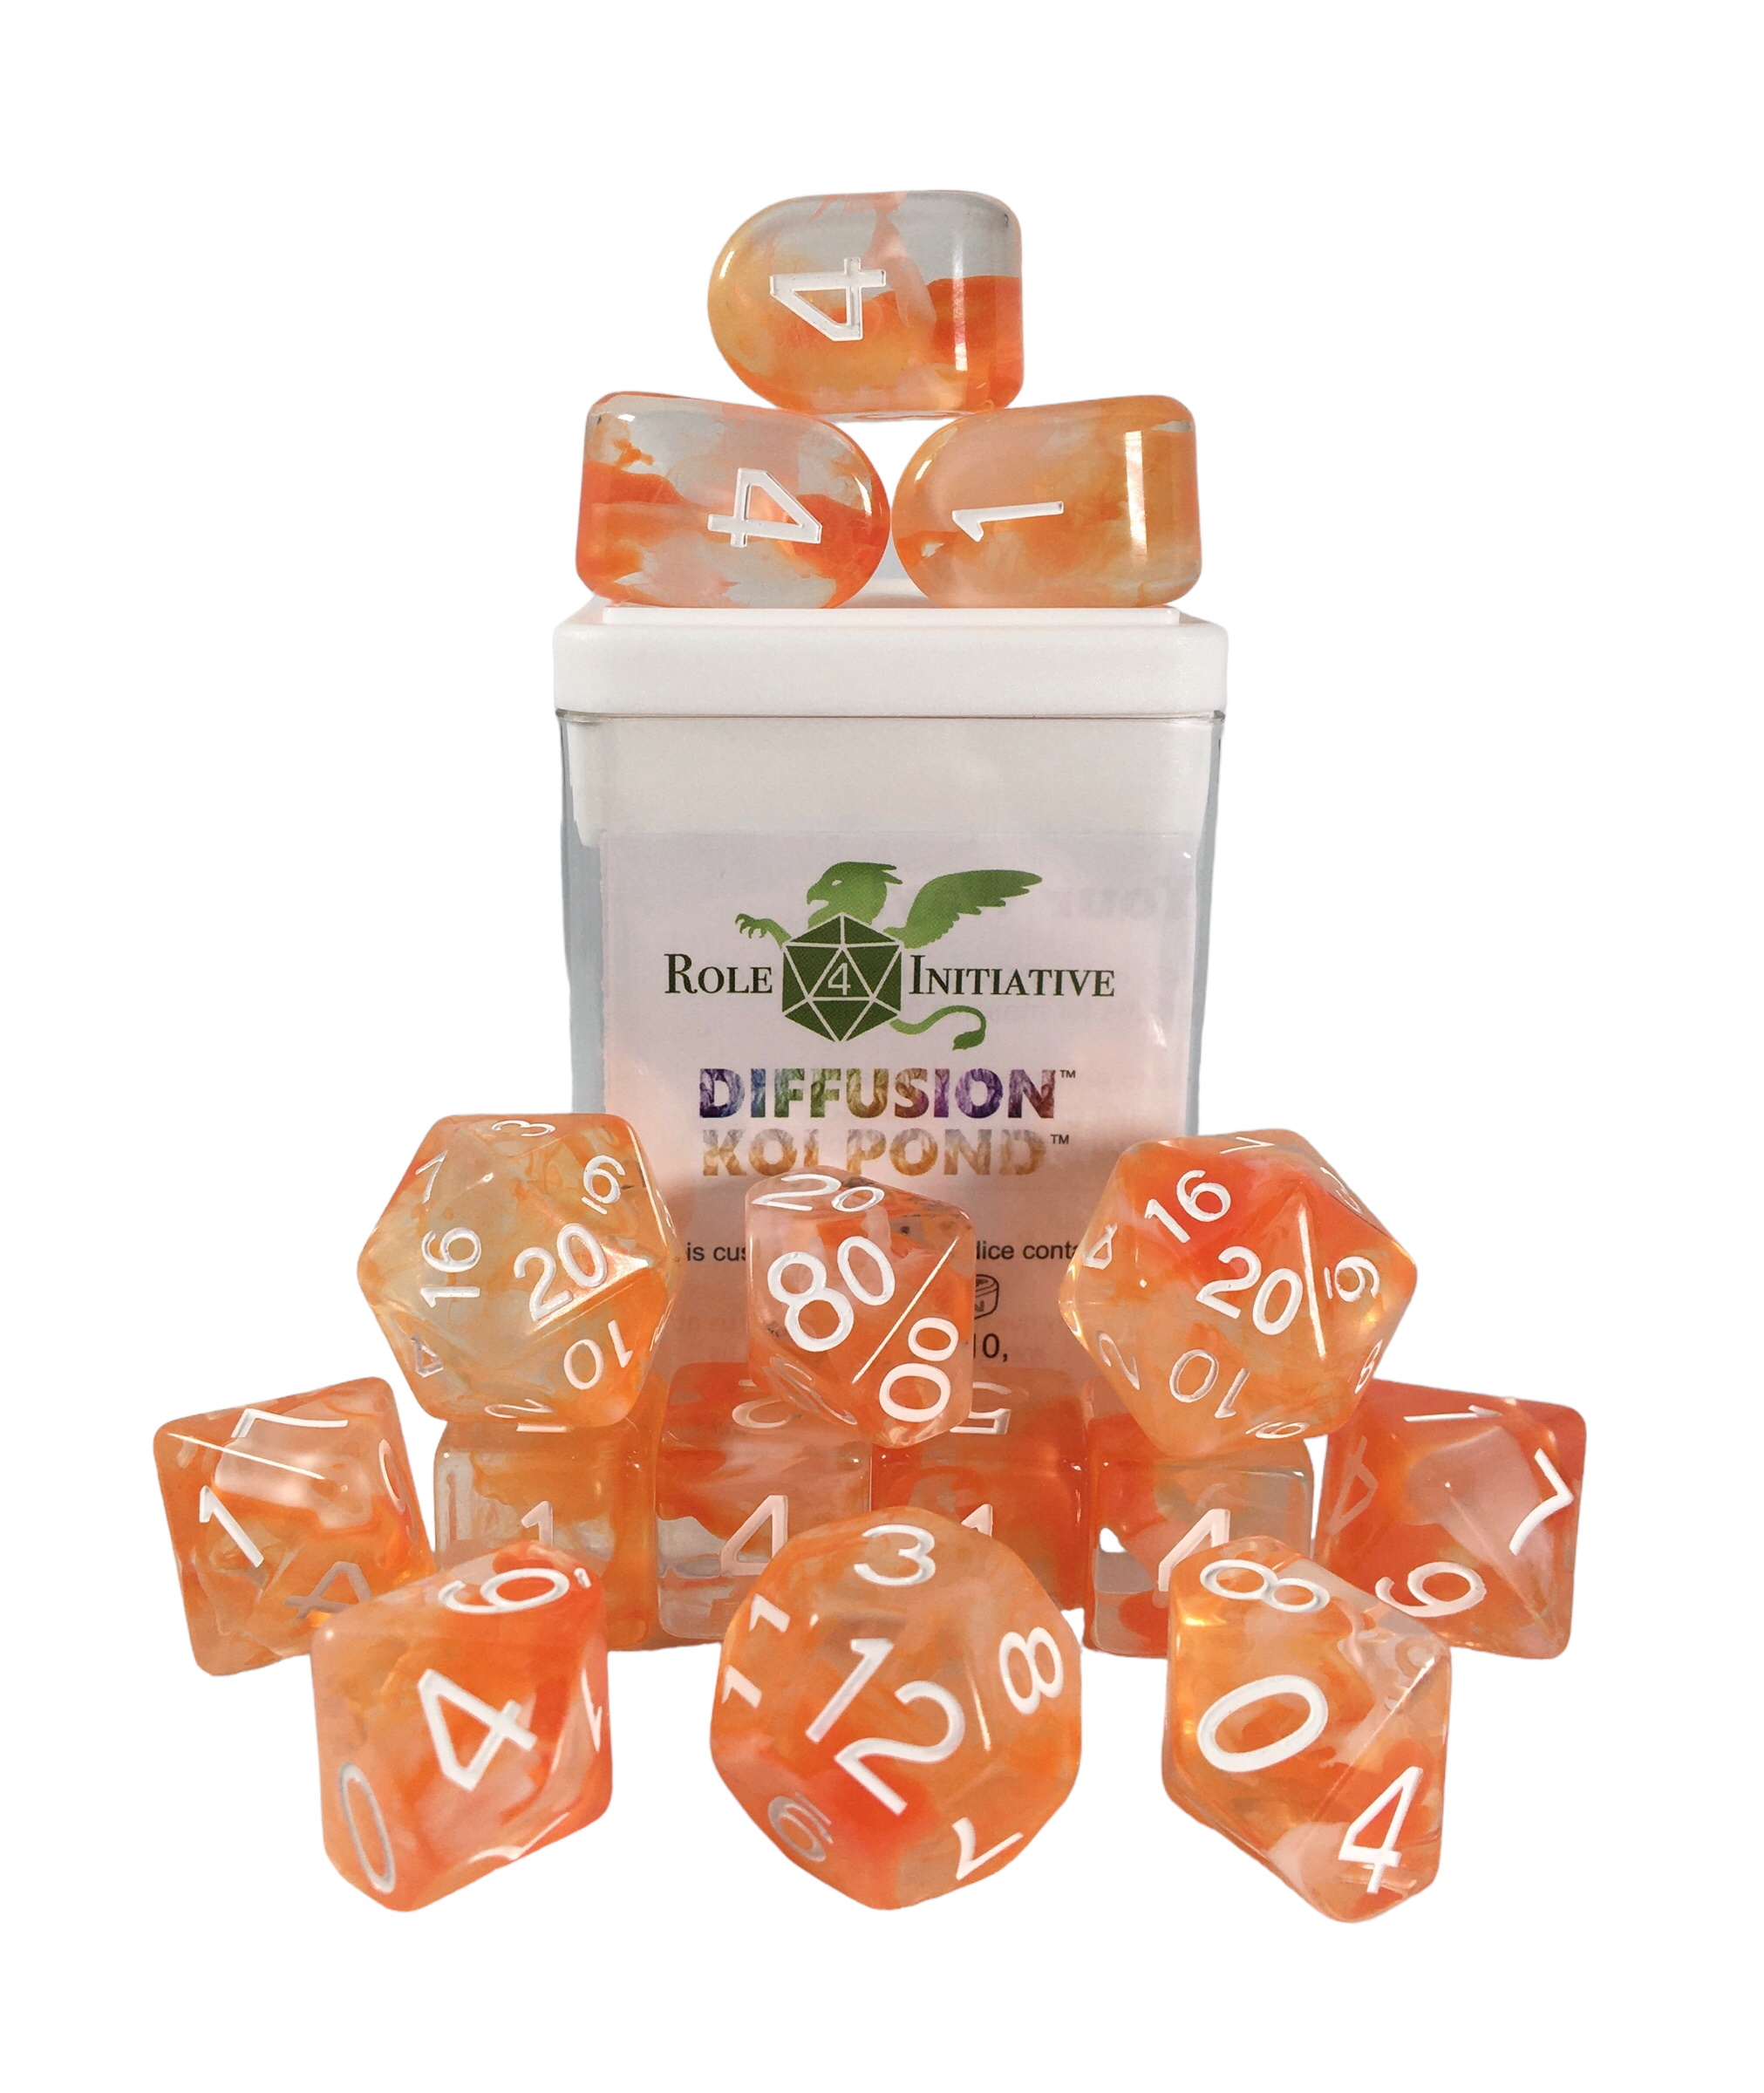 Role 4 Initiative: Polyhedral 15 Dice Set: Diffusion Koi Pond Arch D4 